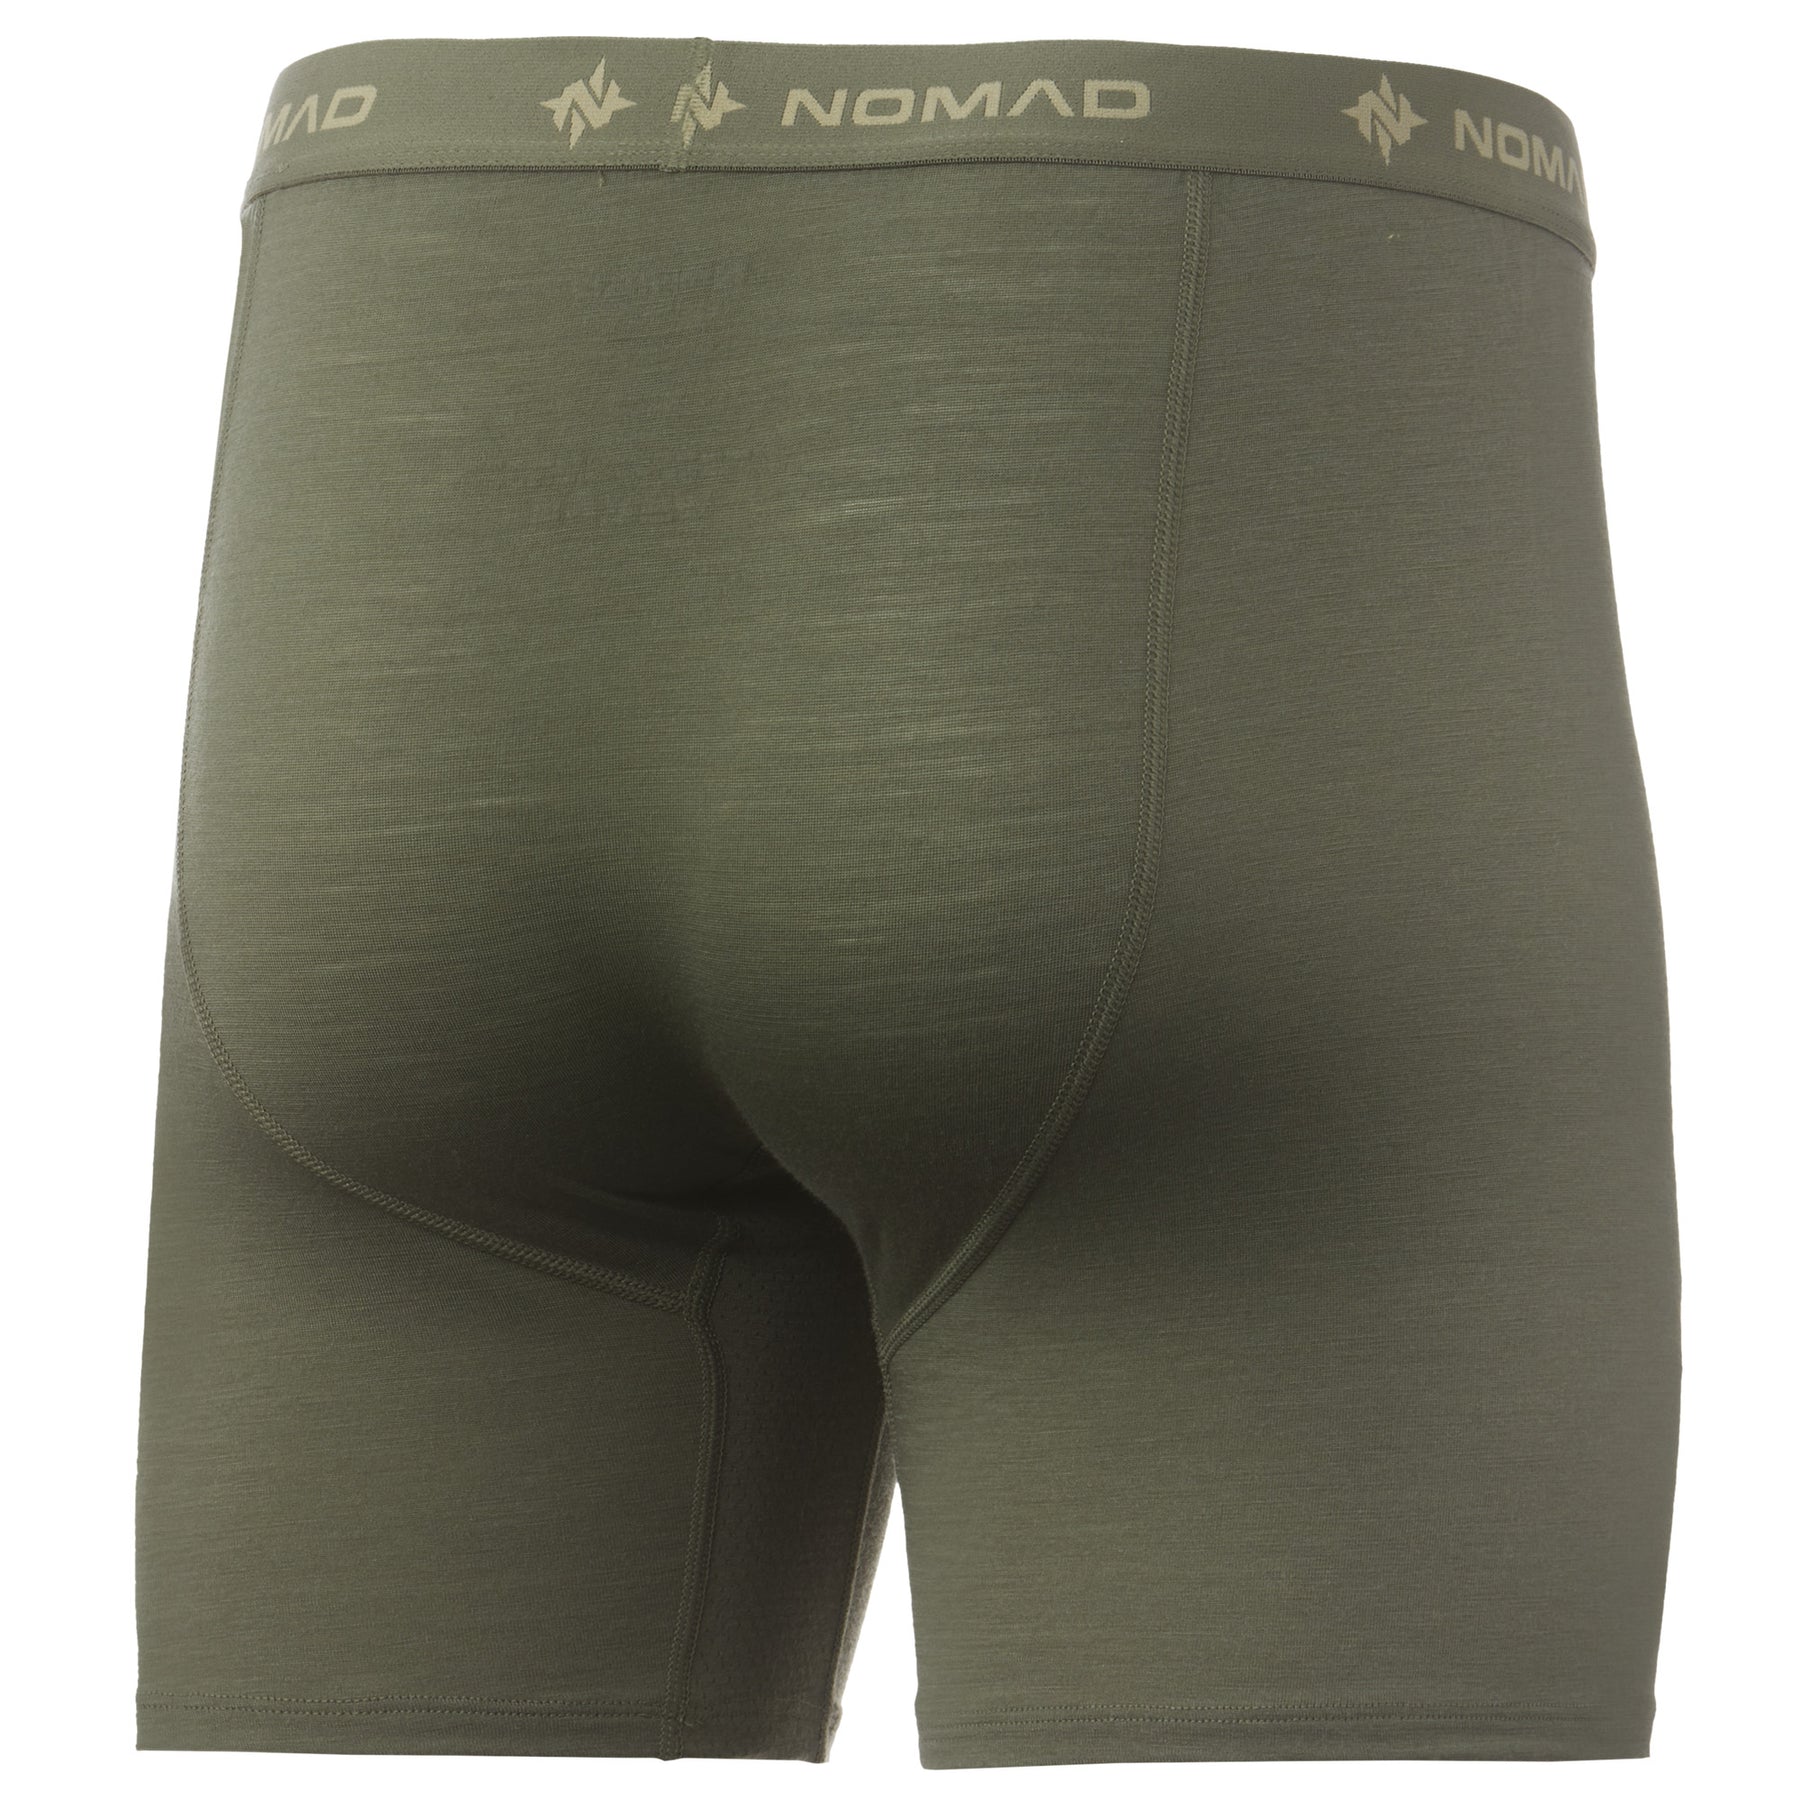 Nomad Durawool Boxer Jock – NOMAD Outdoor